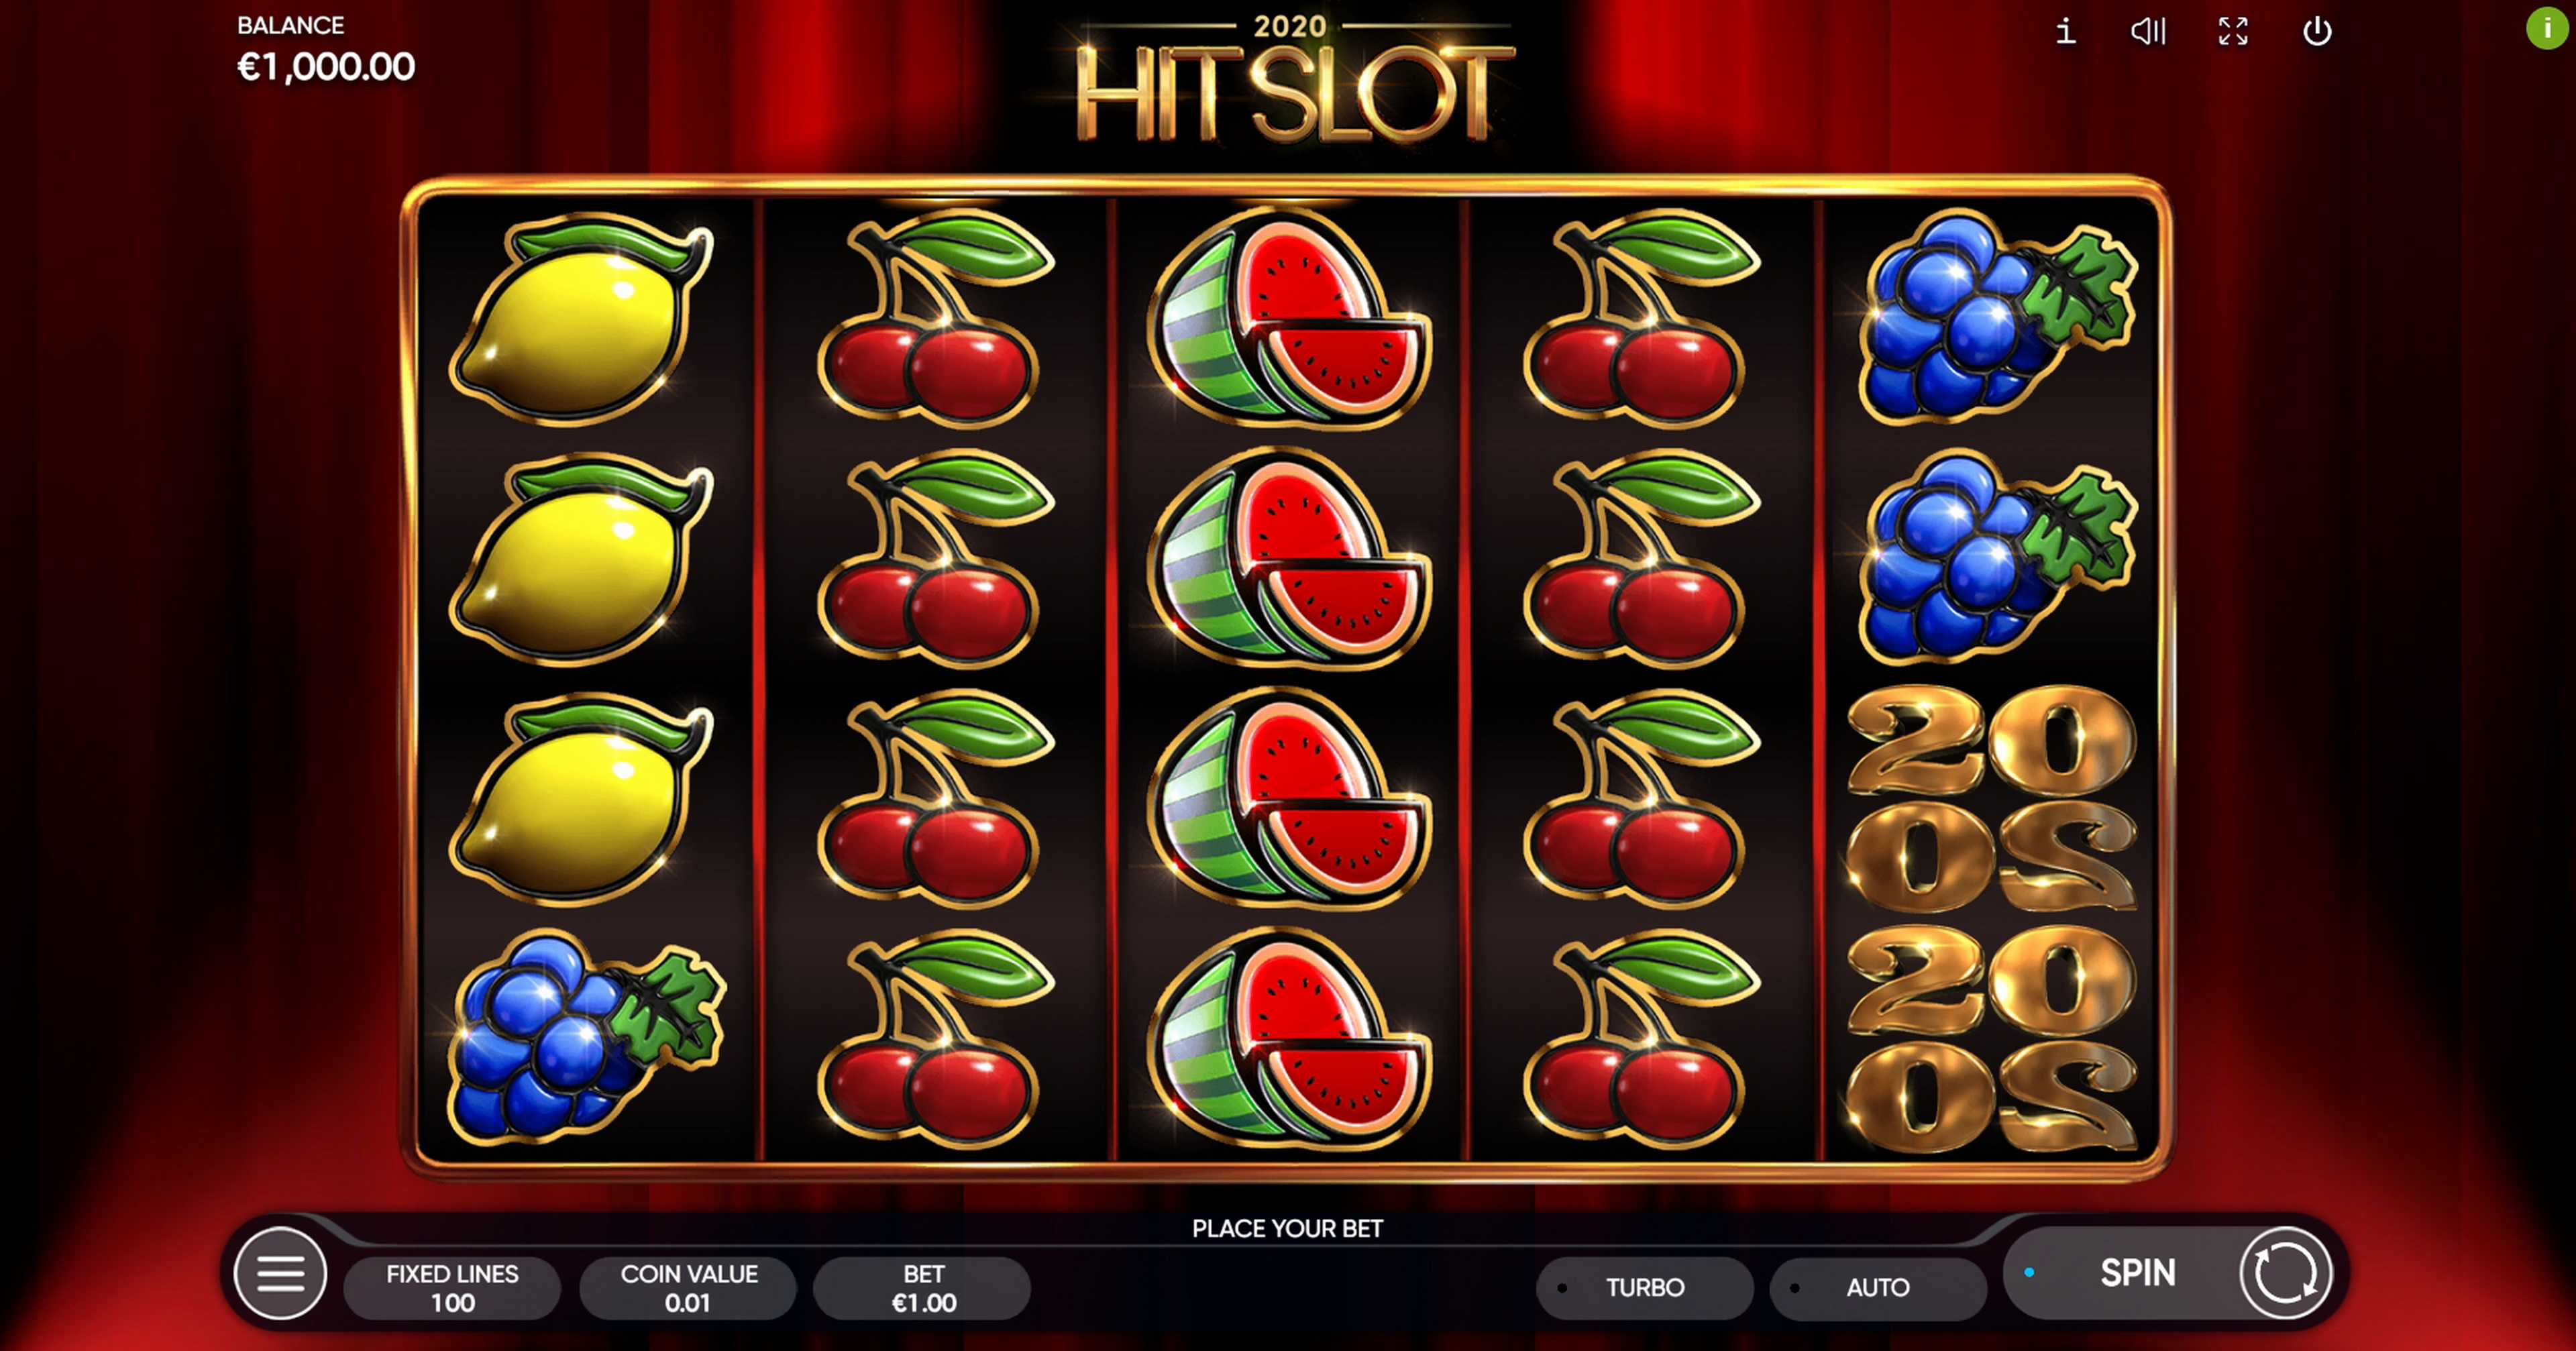 Reels in 2020 Hit Slot Slot Game by Endorphina